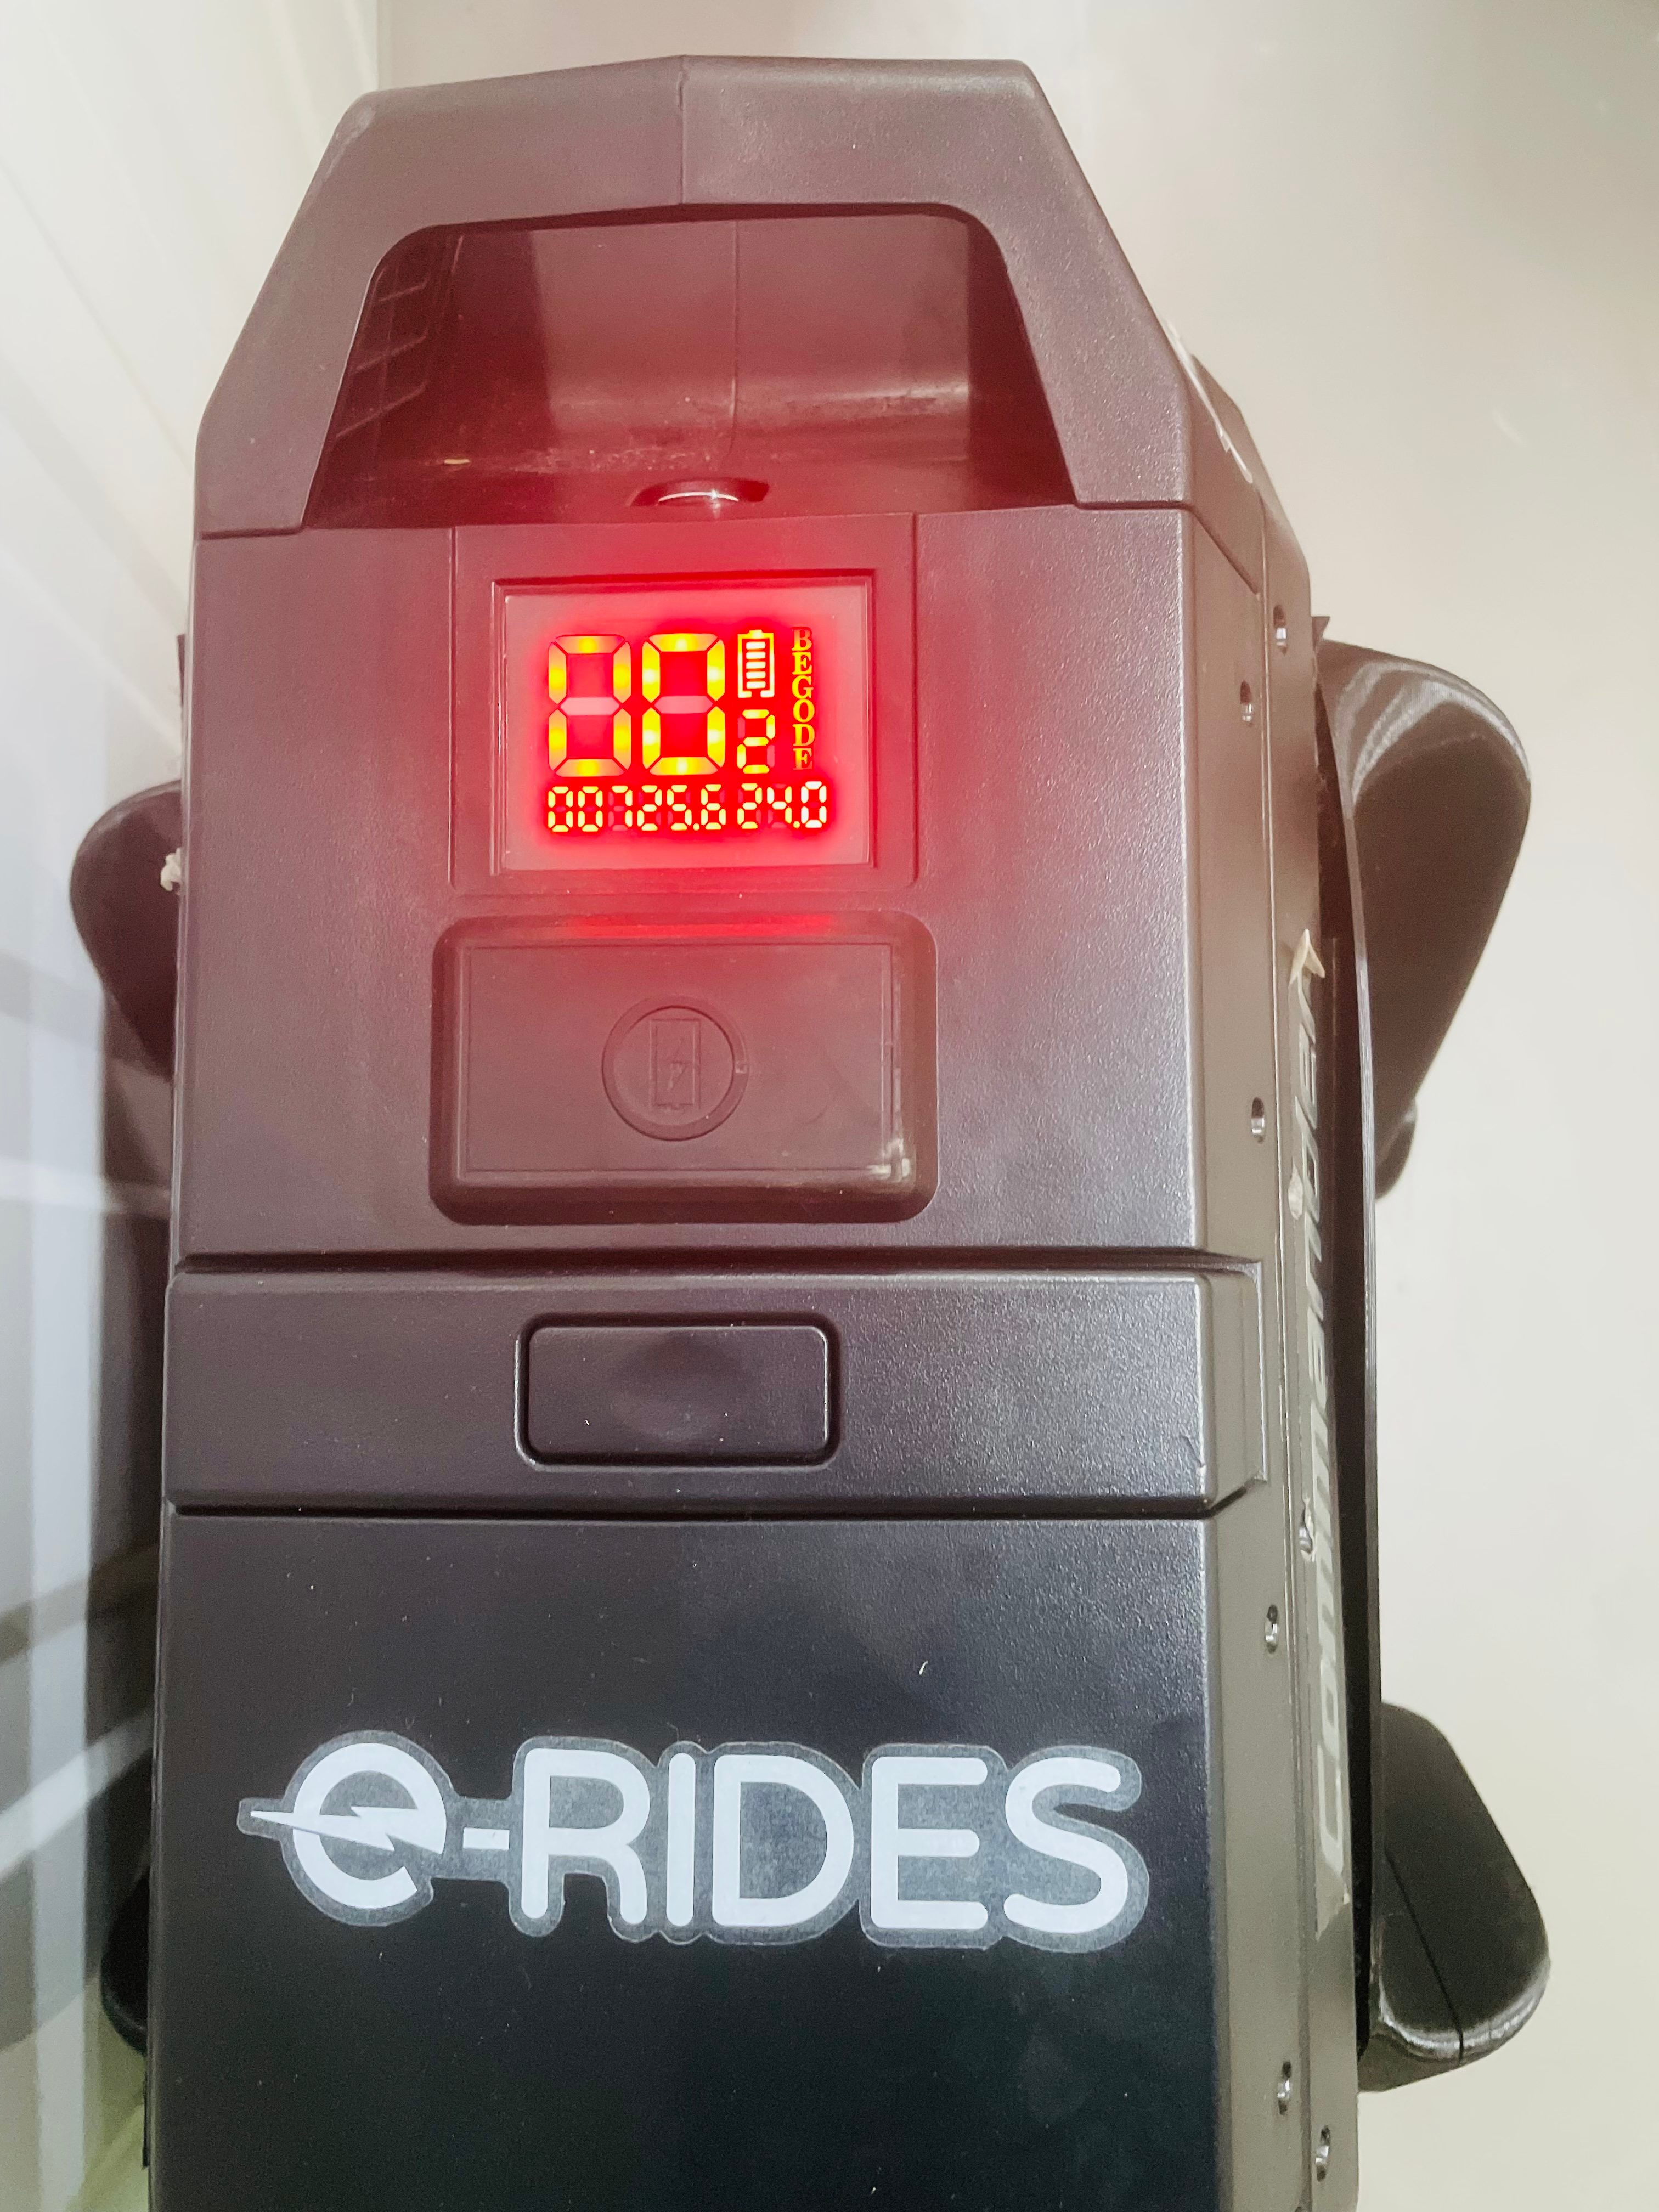 extremebull electric unicycle high speed odometer e-rides.com